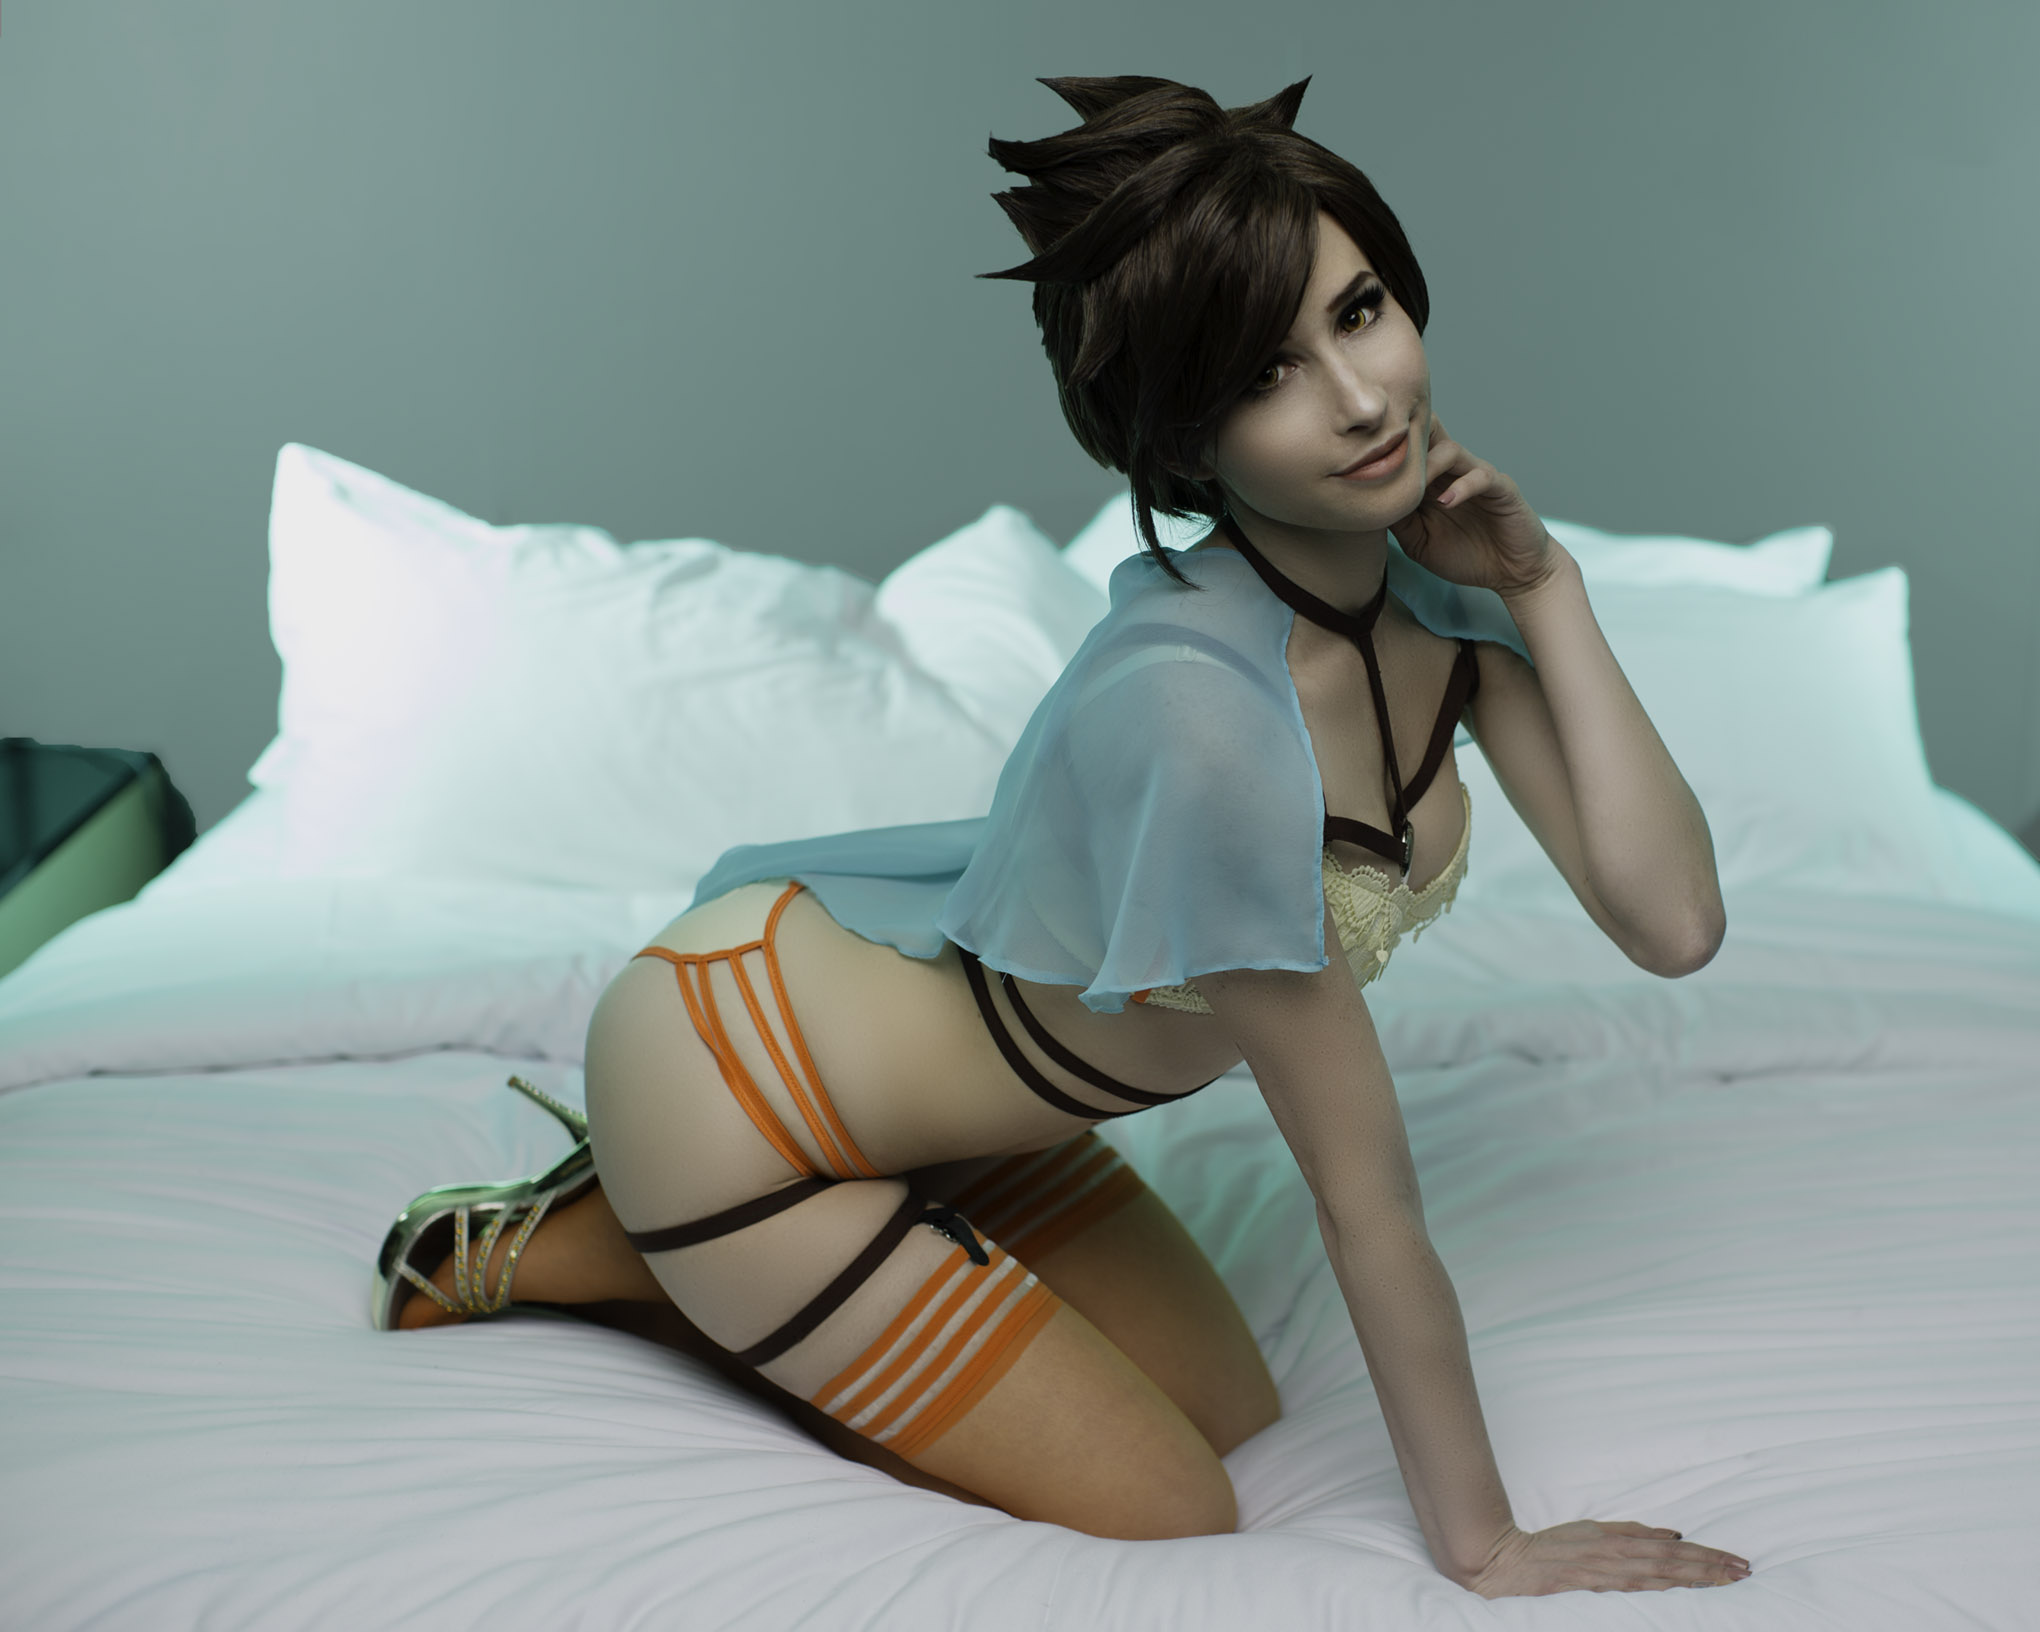 NSFW Overwatch Cosplay Was The Star Of The Show